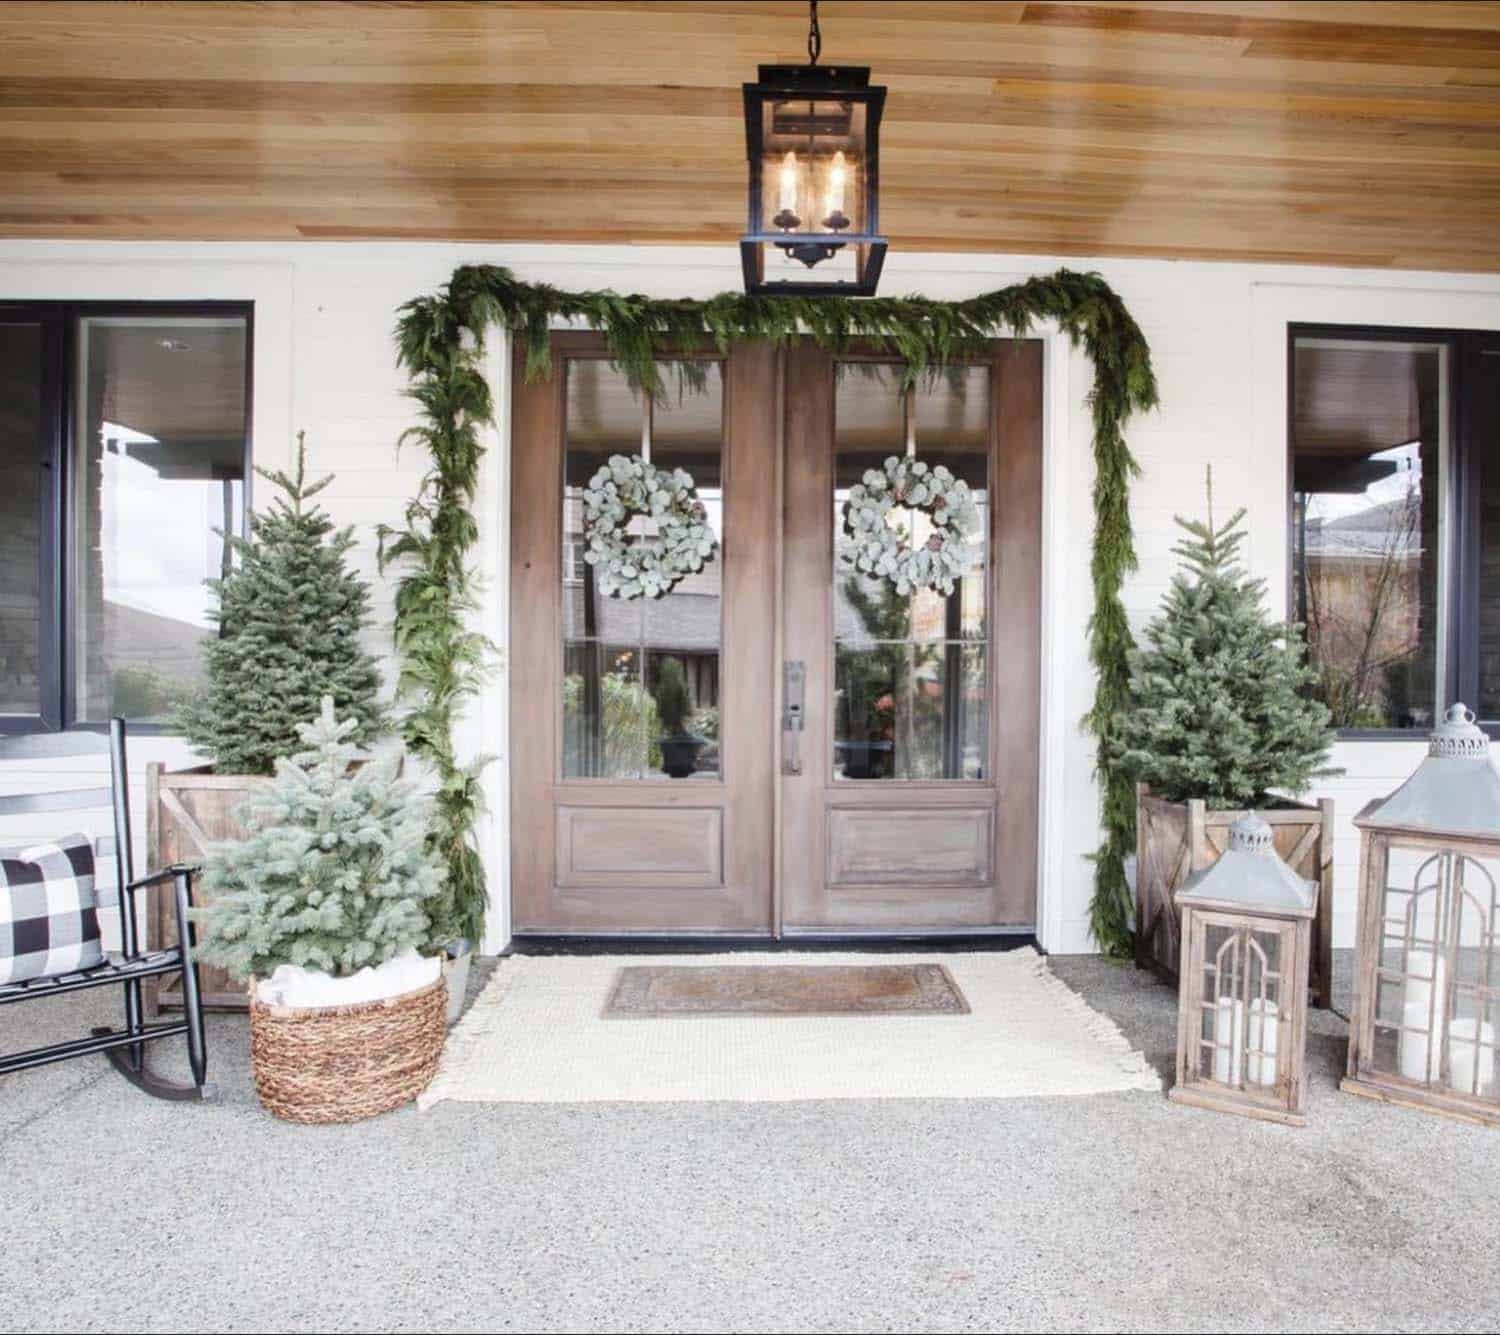 Christmas decorated front porch with garland and noble fir trees